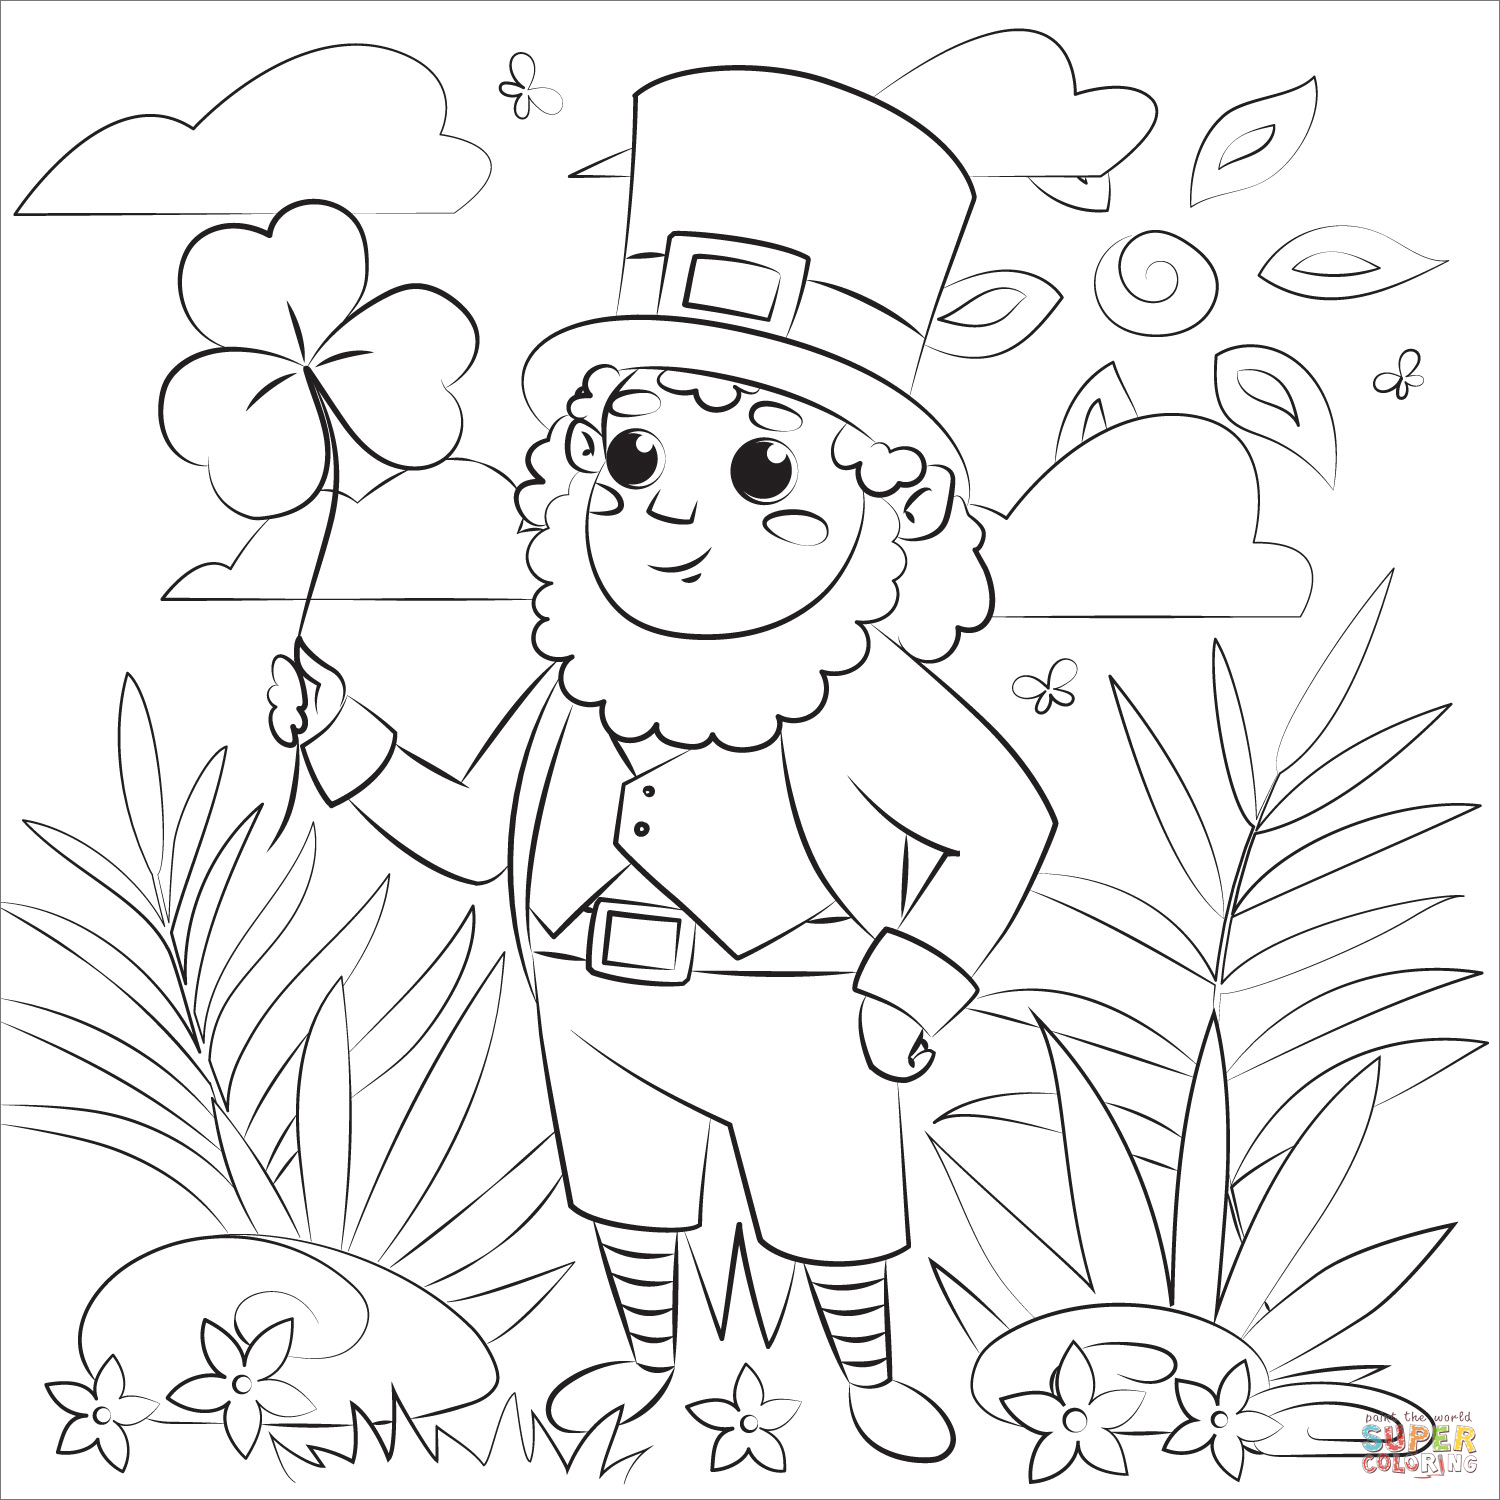 Leprechaun coloring page free printable coloring pages